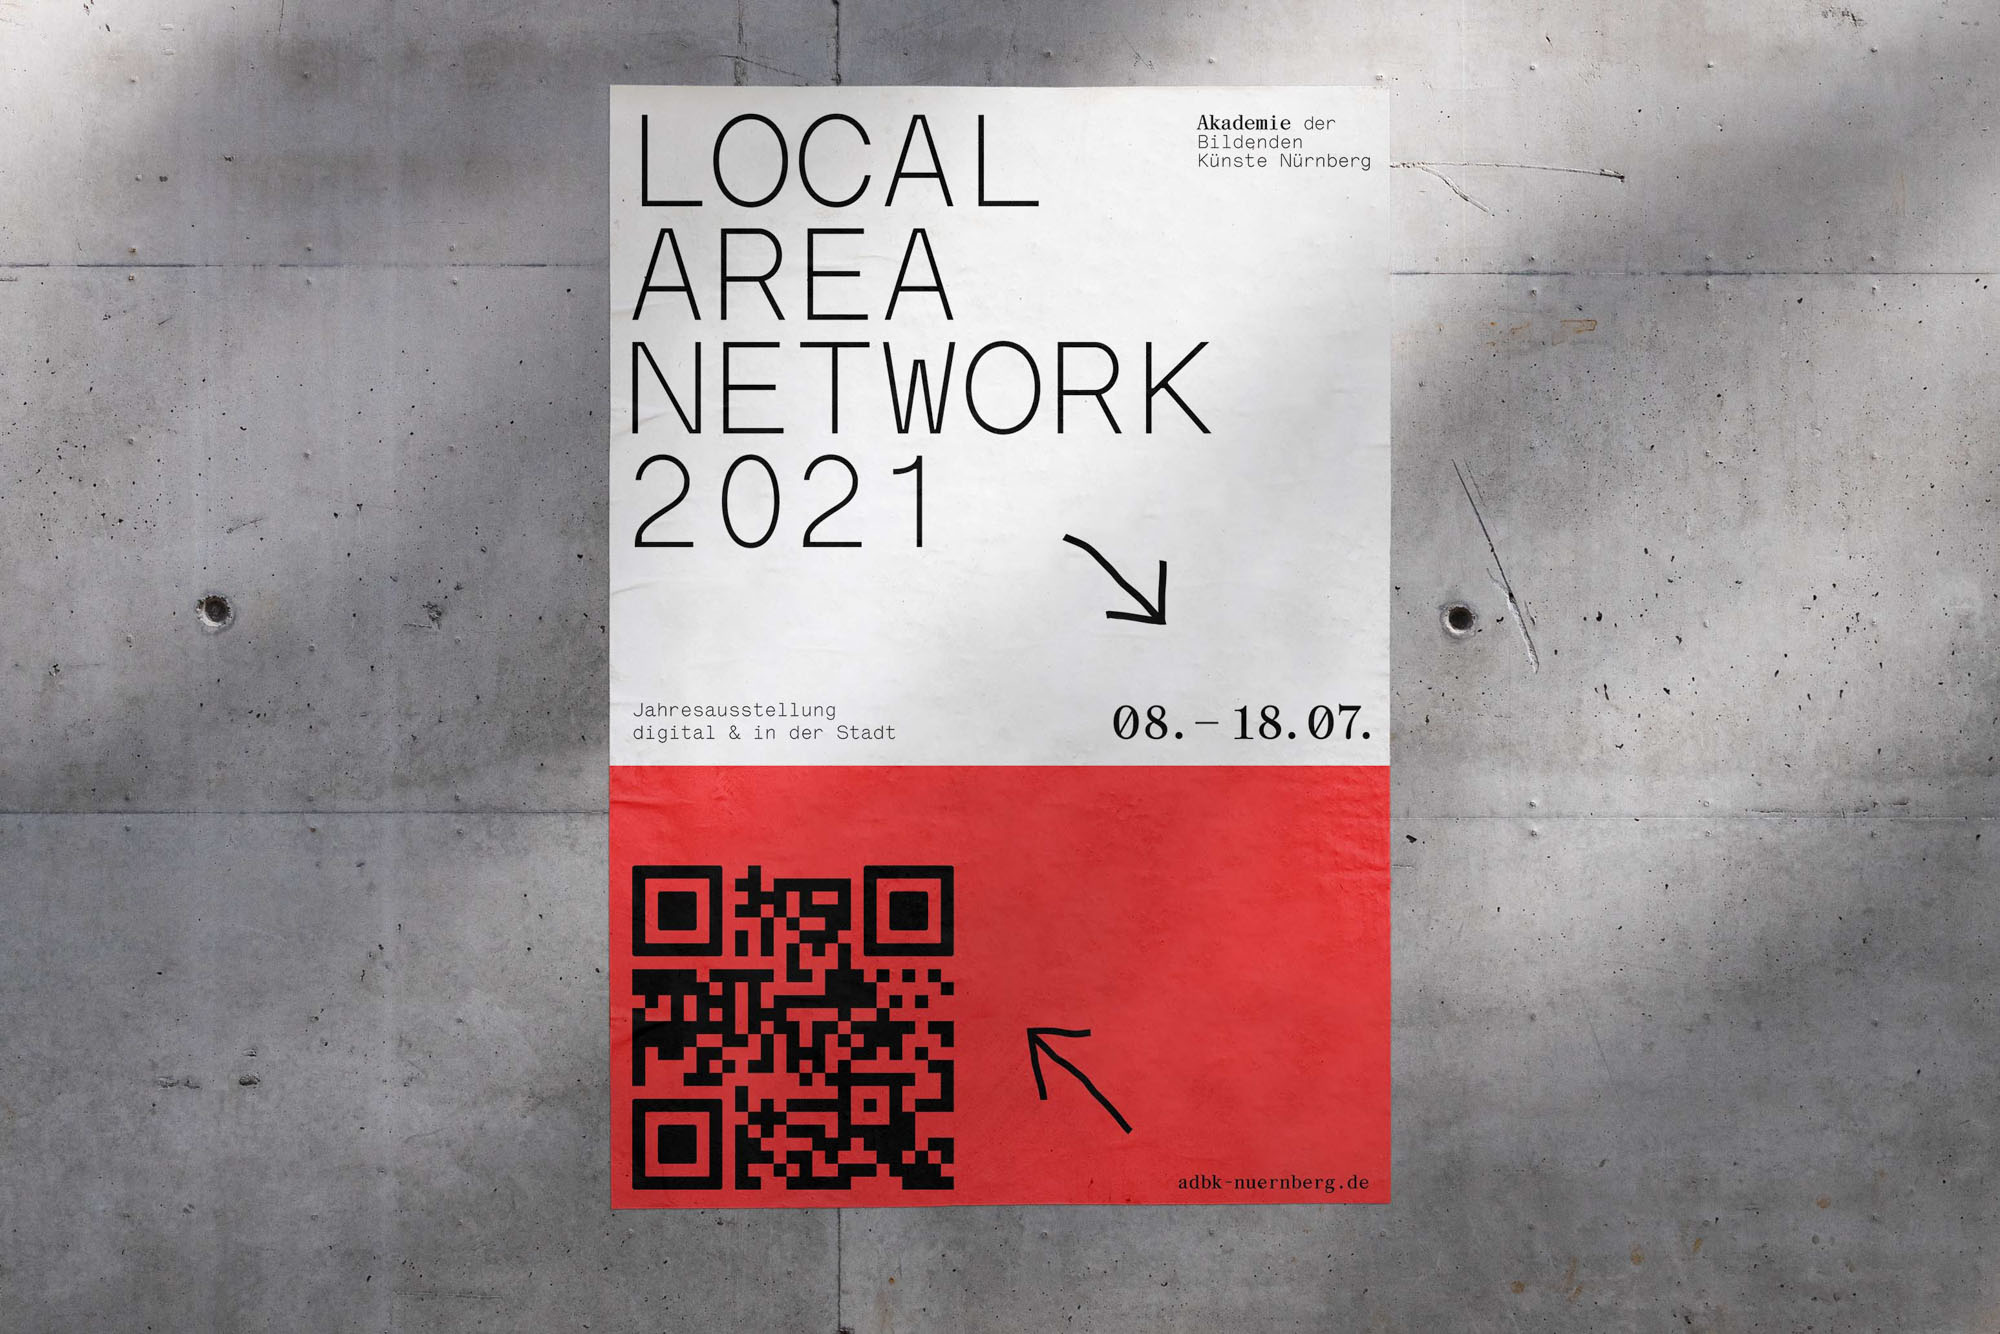 Poster for Local Area Network 2021 on wall